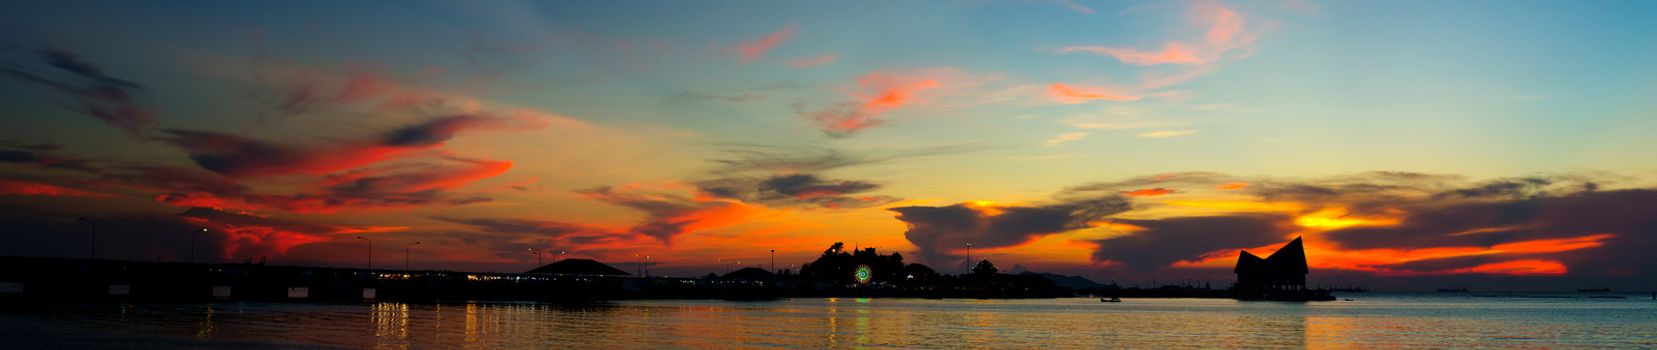 Panoramic sunset sky with silhouette of island (Kho Loi), Landscape